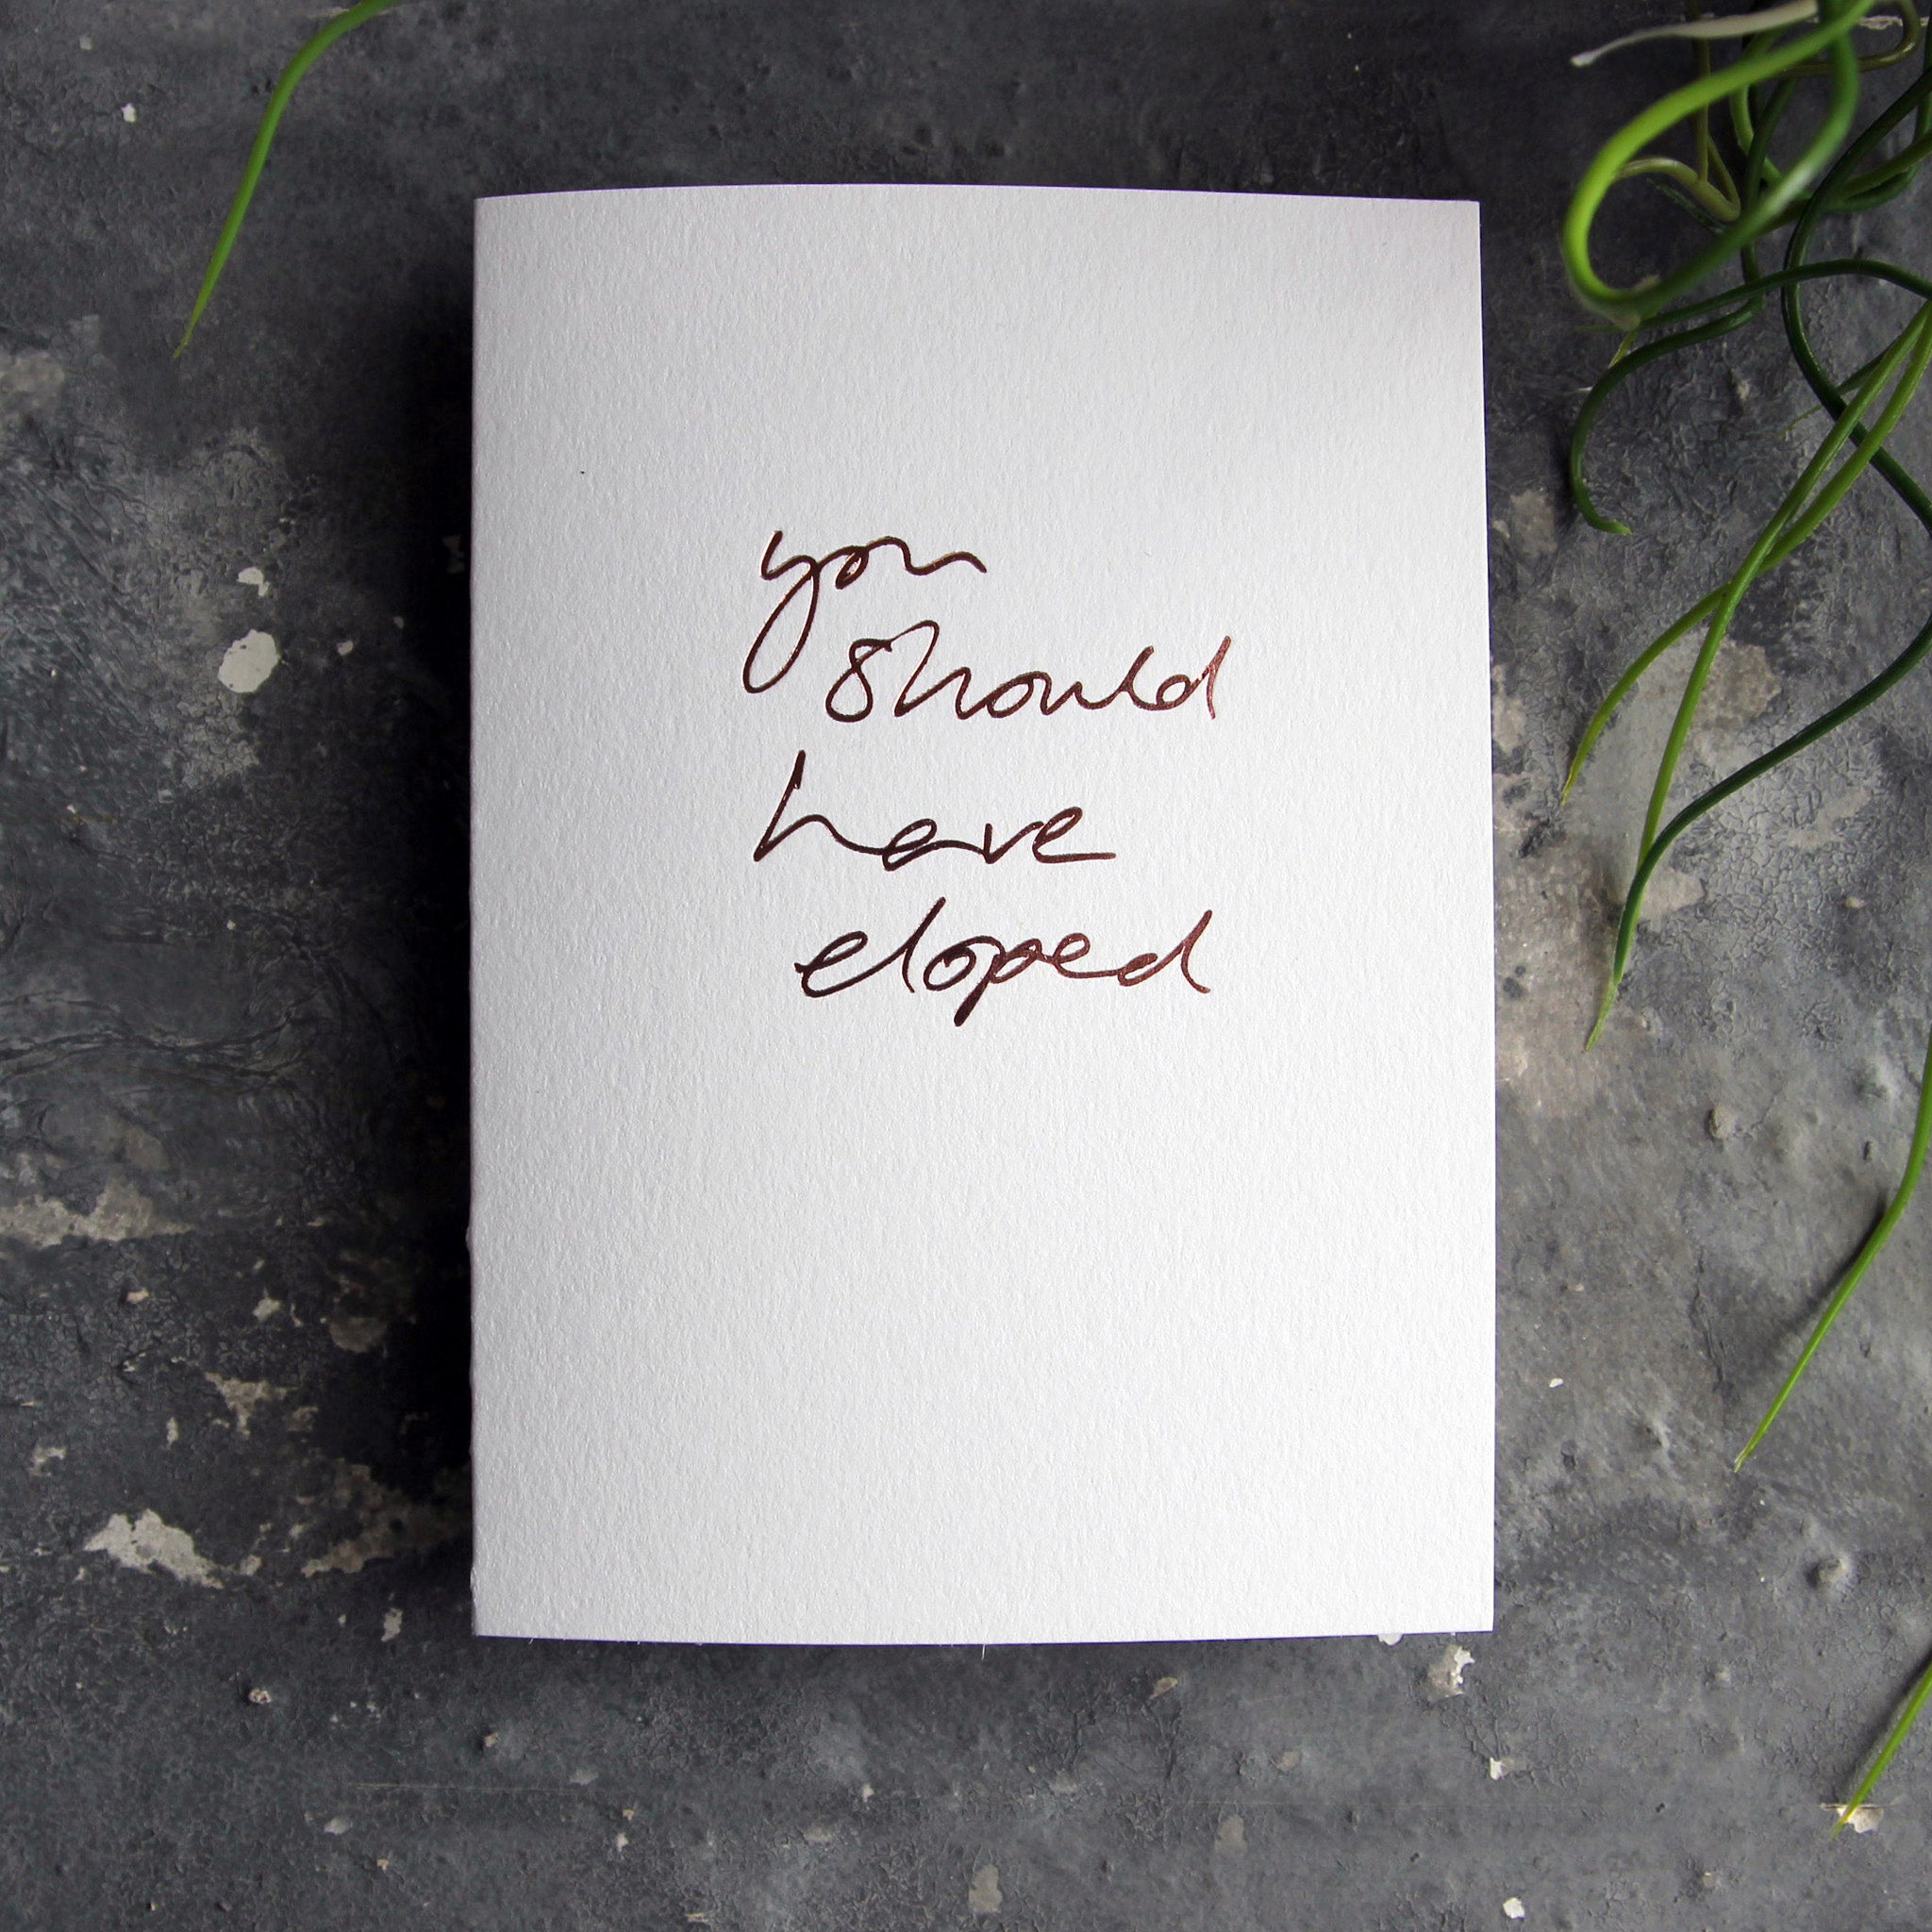 Luxury white greetings card with "You Should Have Eloped' handwritten in the front and hand printed in rose gold foil on a grey background with some green plant leaves at the side.